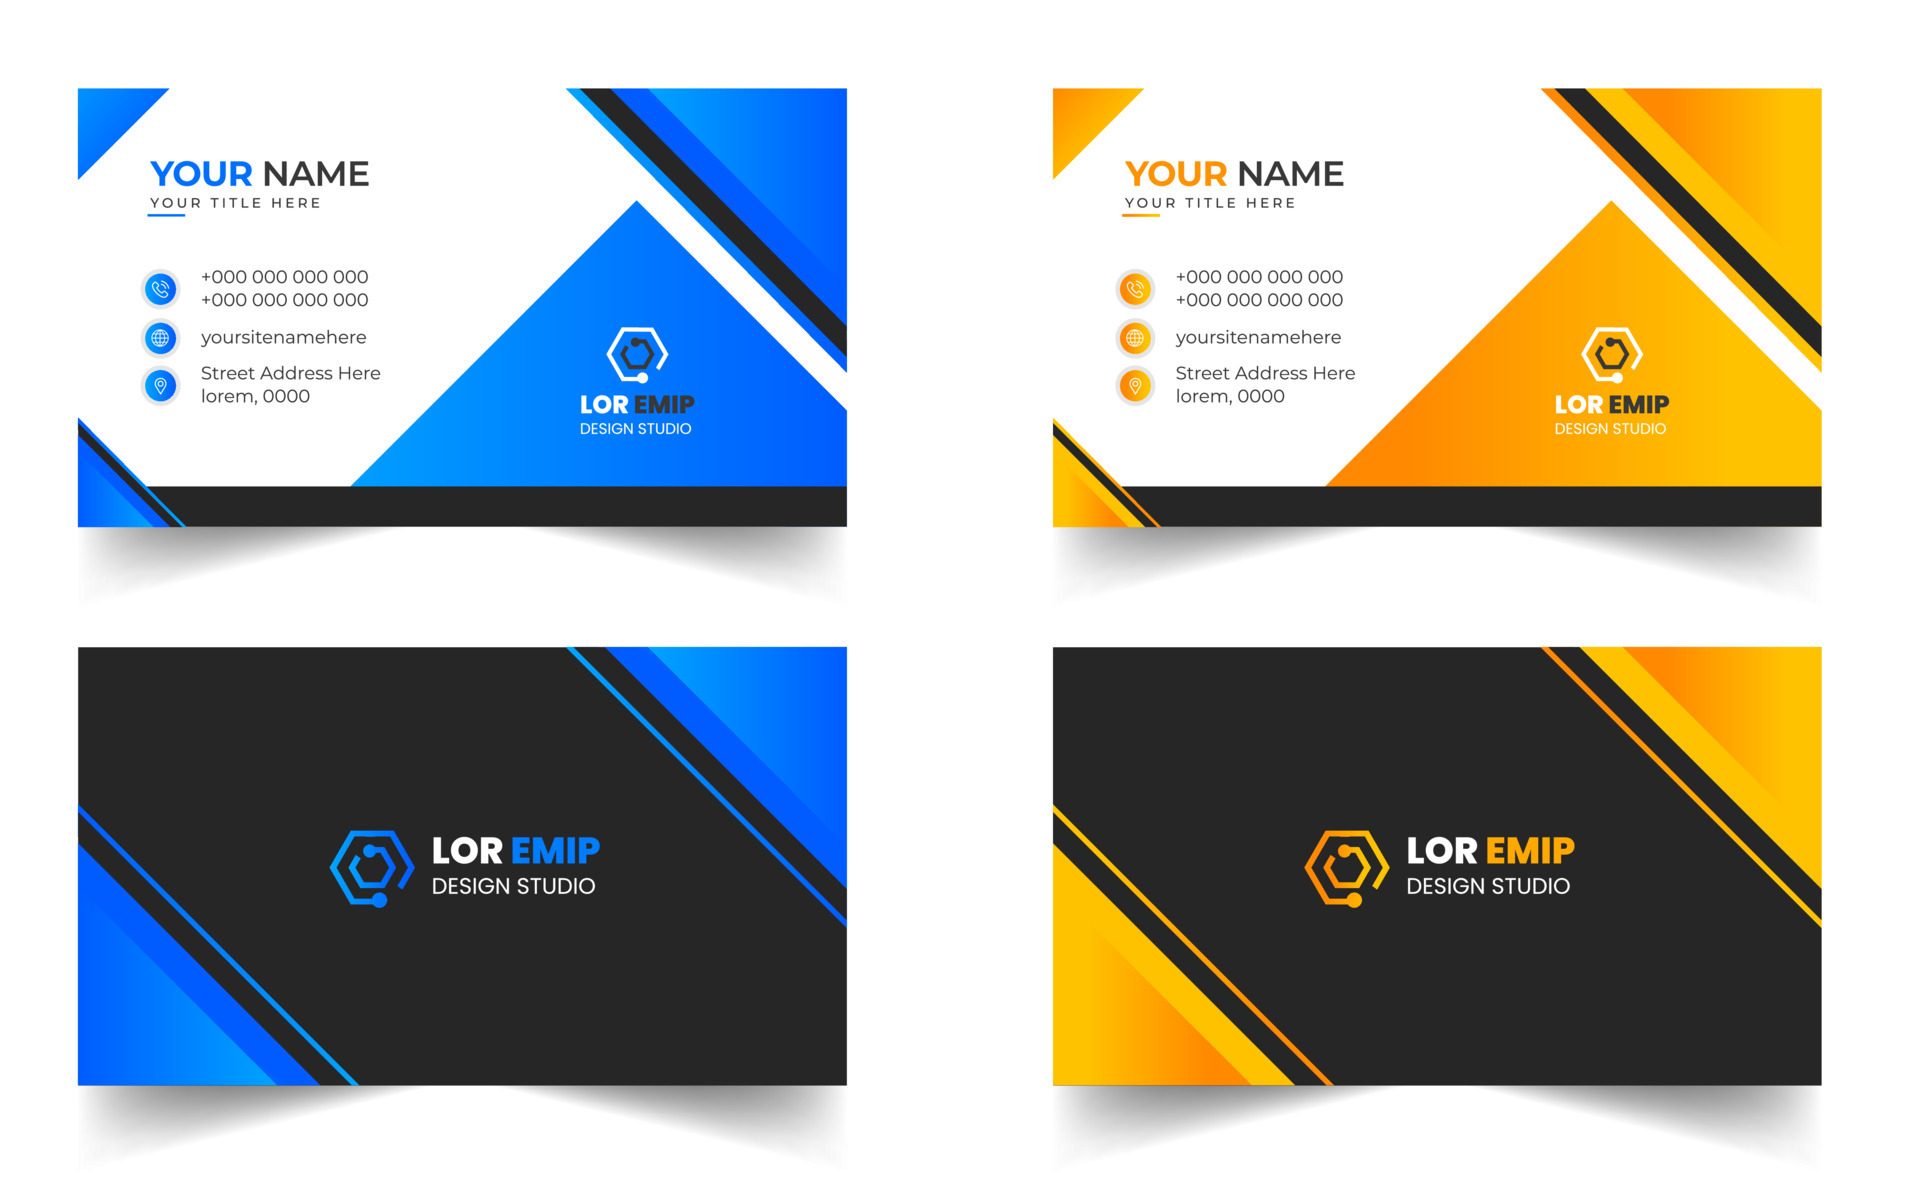 blue-and-yellow-modern-creative-business-card-design-template-unique-shape-modern-business-card-design-free-vector (1)